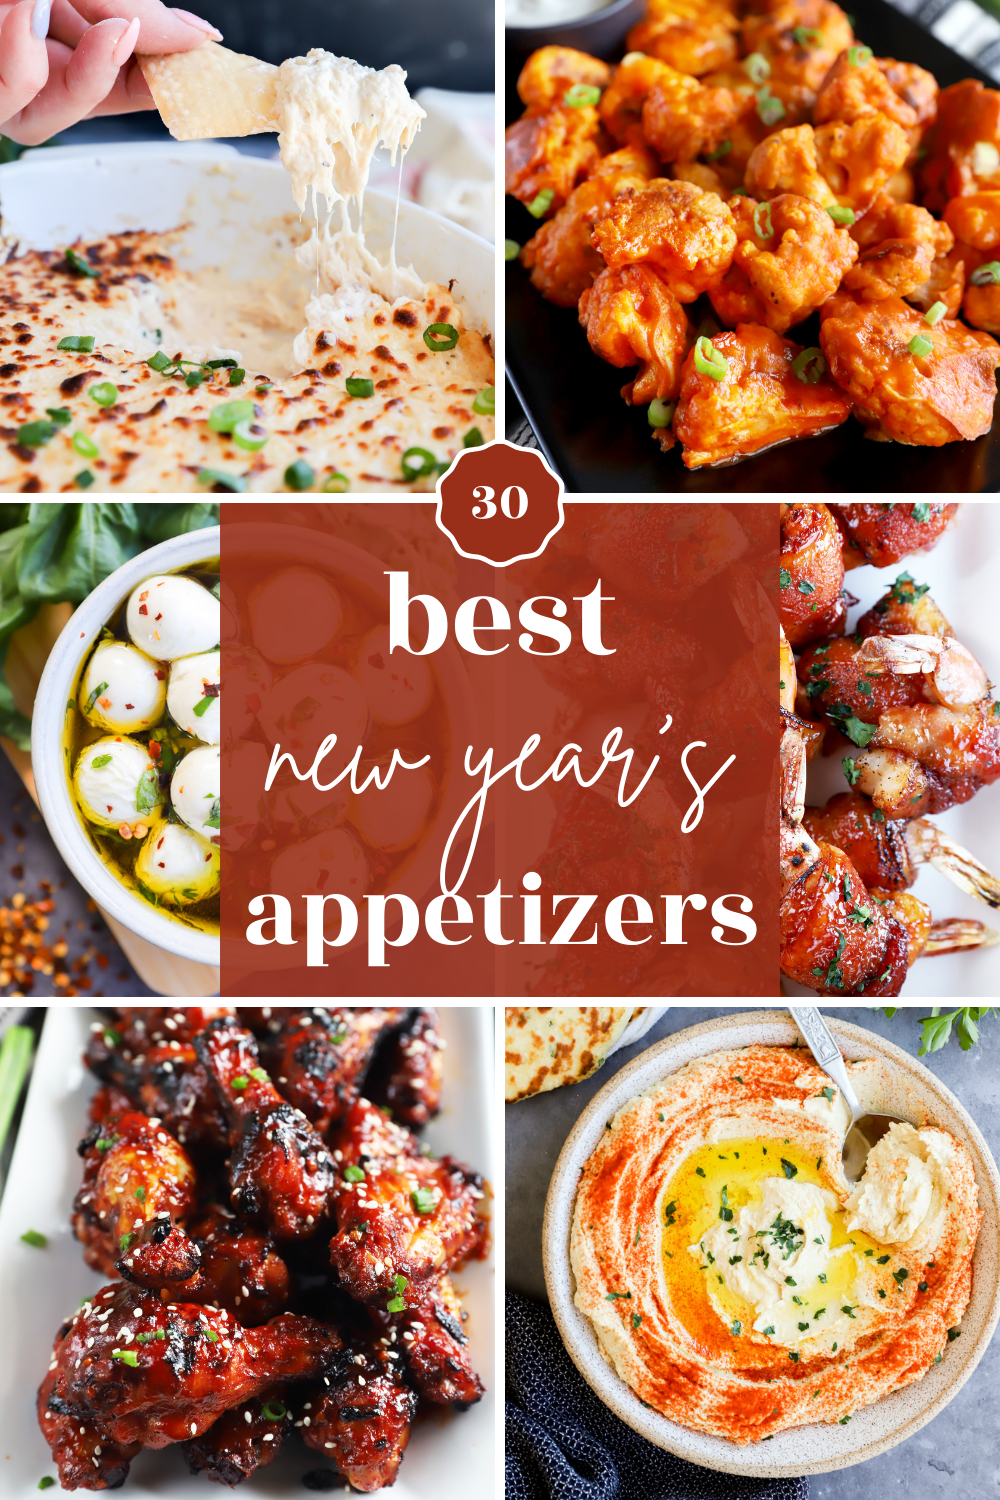 New years appetizers pinterest image